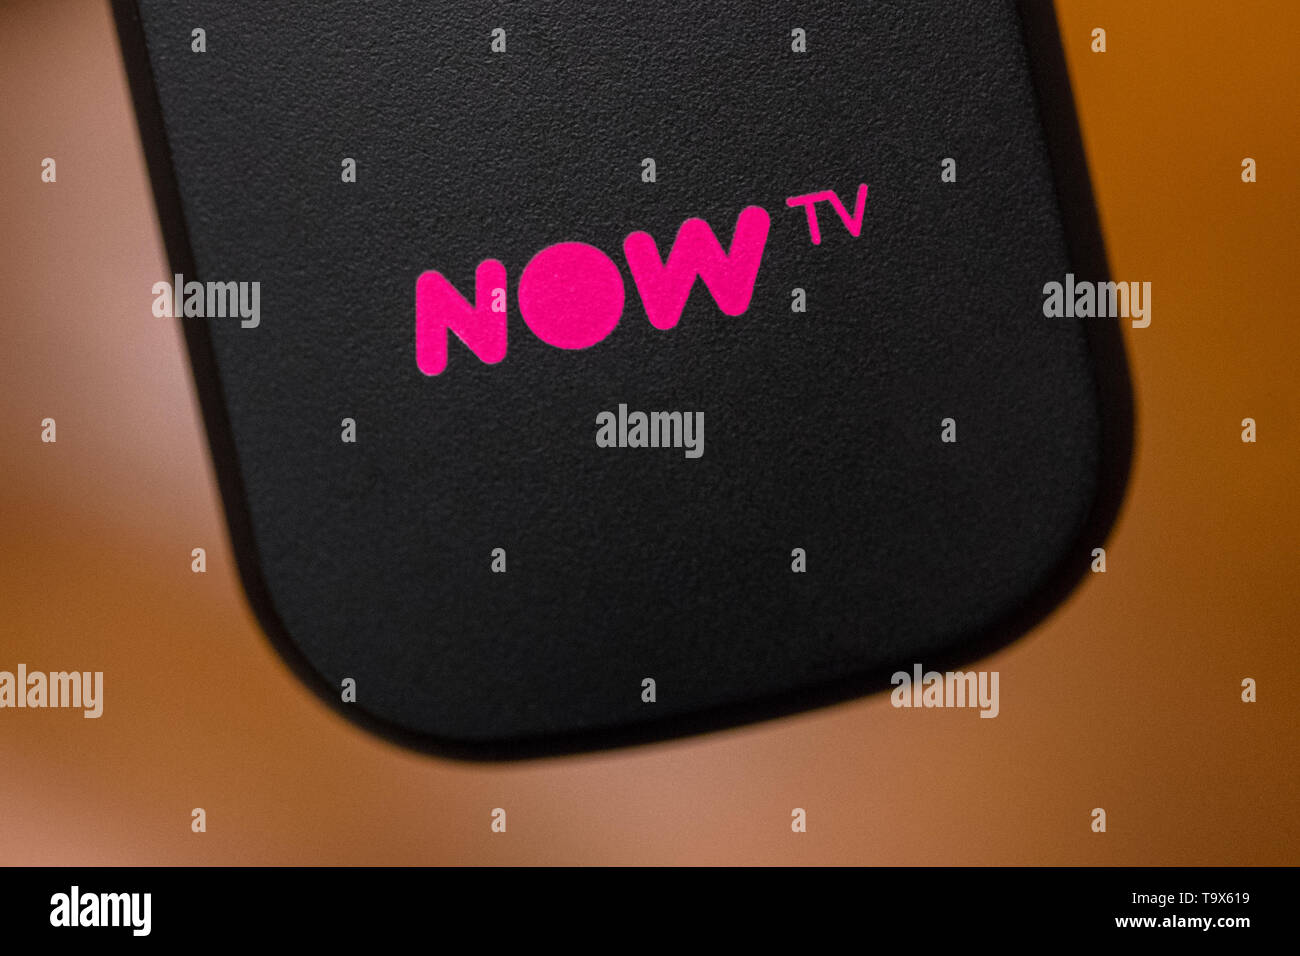 London, UK - May 14th 2019: A close-up of the NOW TV logo pictured on a remote control. Stock Photo